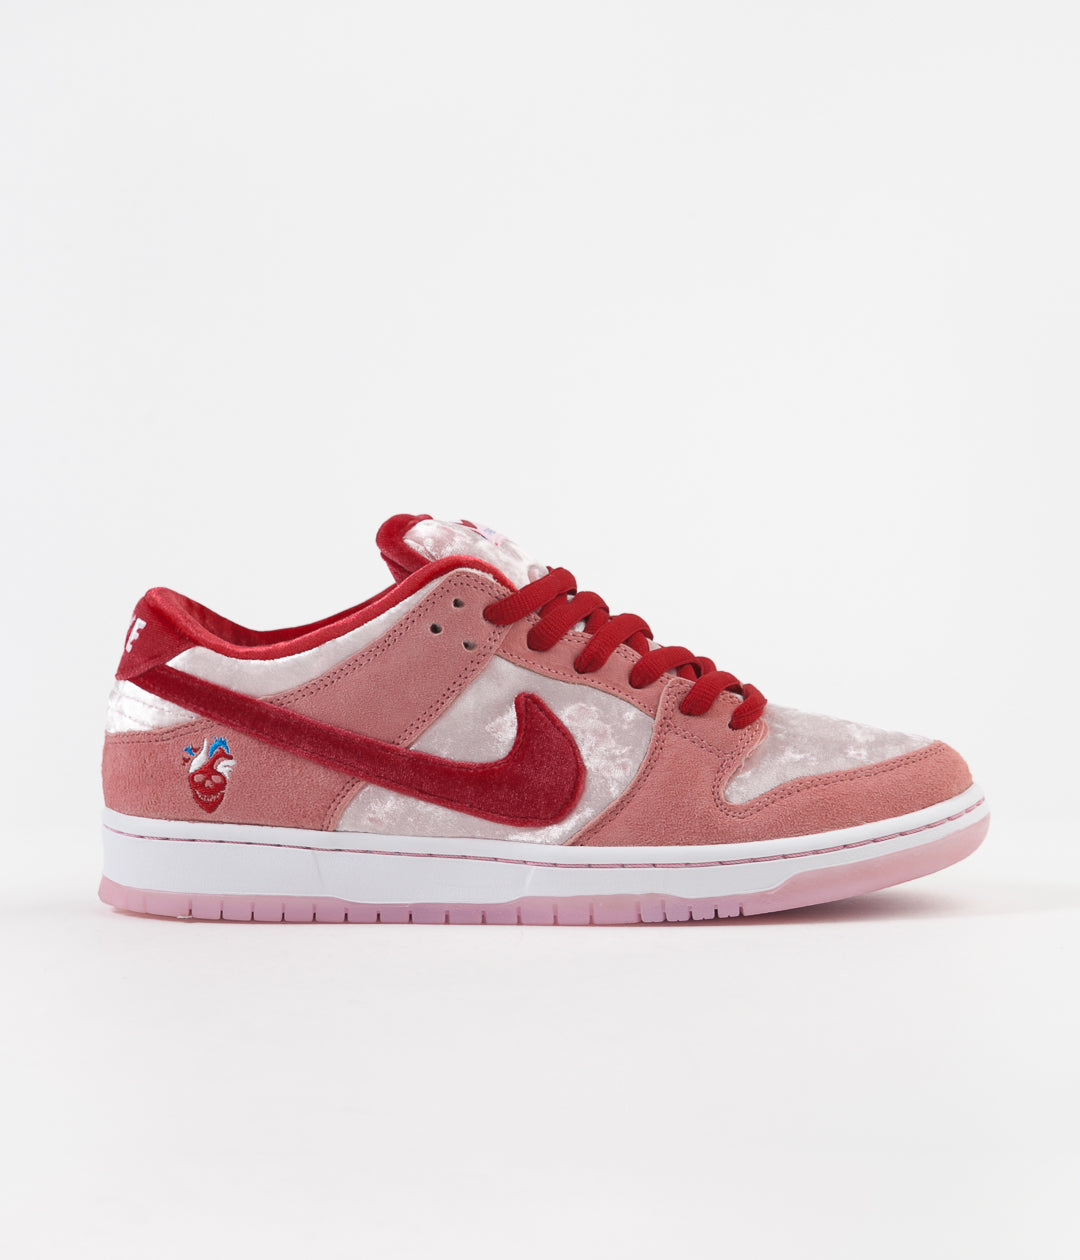 nike pink and red